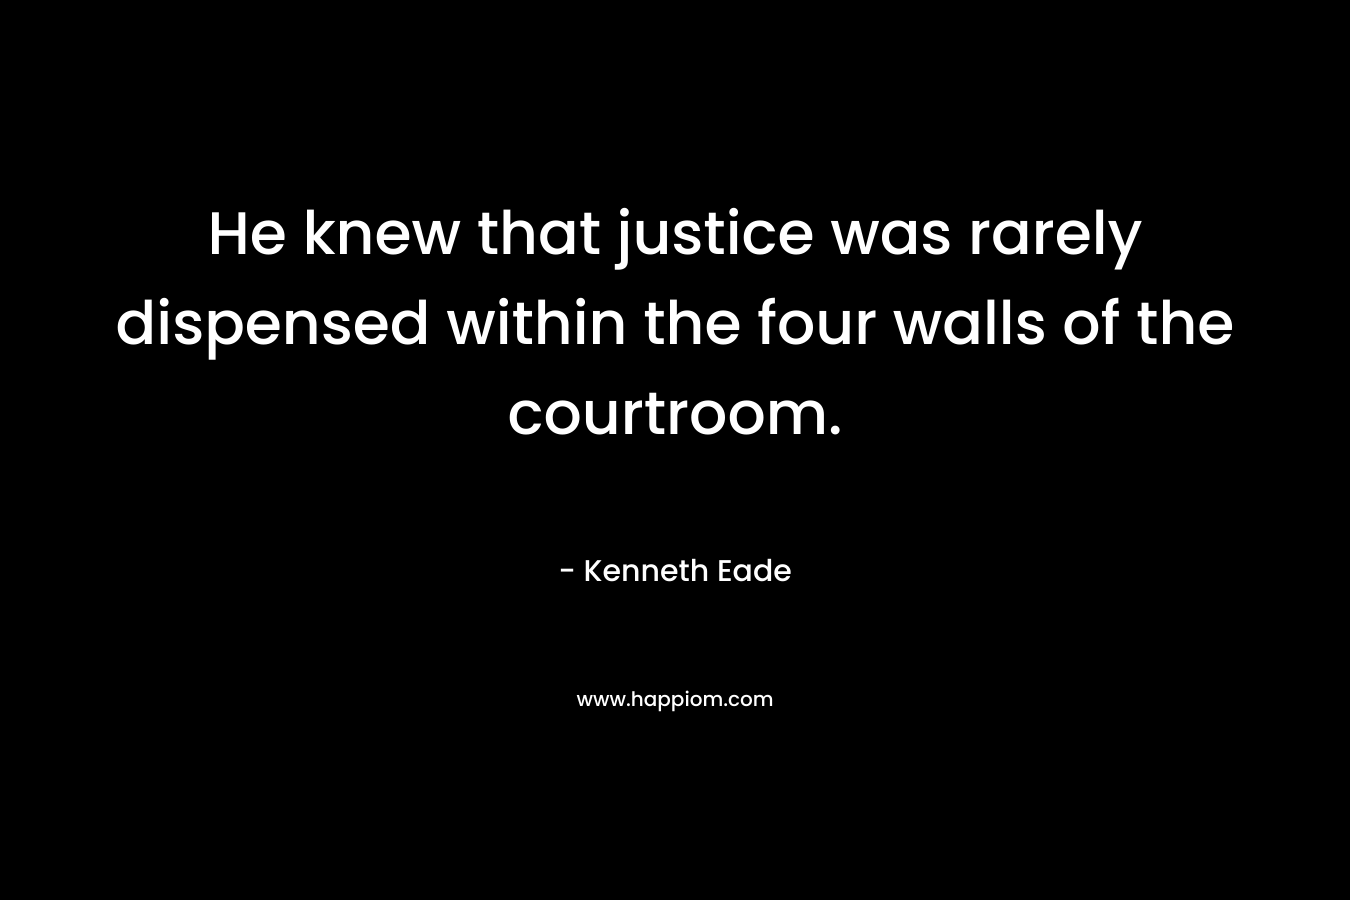 He knew that justice was rarely dispensed within the four walls of the courtroom. – Kenneth Eade